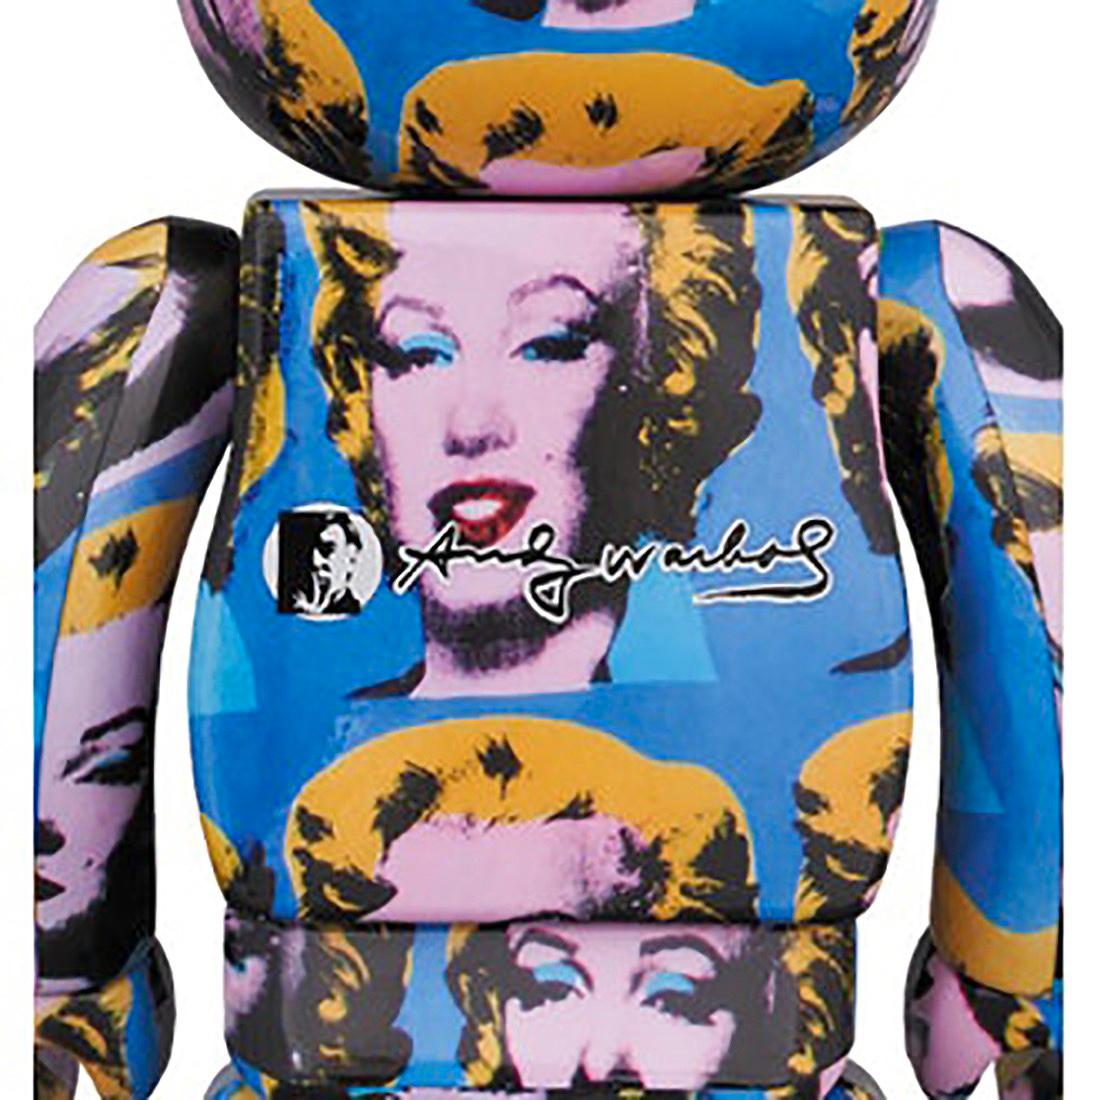 Bearbrick x Andy Warhol Foundation Marilyn 400% Vinyl Figures (Set of two works):
Andy Warhol (after) Marilyn figure set trademarked & licensed by the Estate of Andy Warhol. The partnered collectible reveals Warhol's iconic 60s Marilyn Monroe